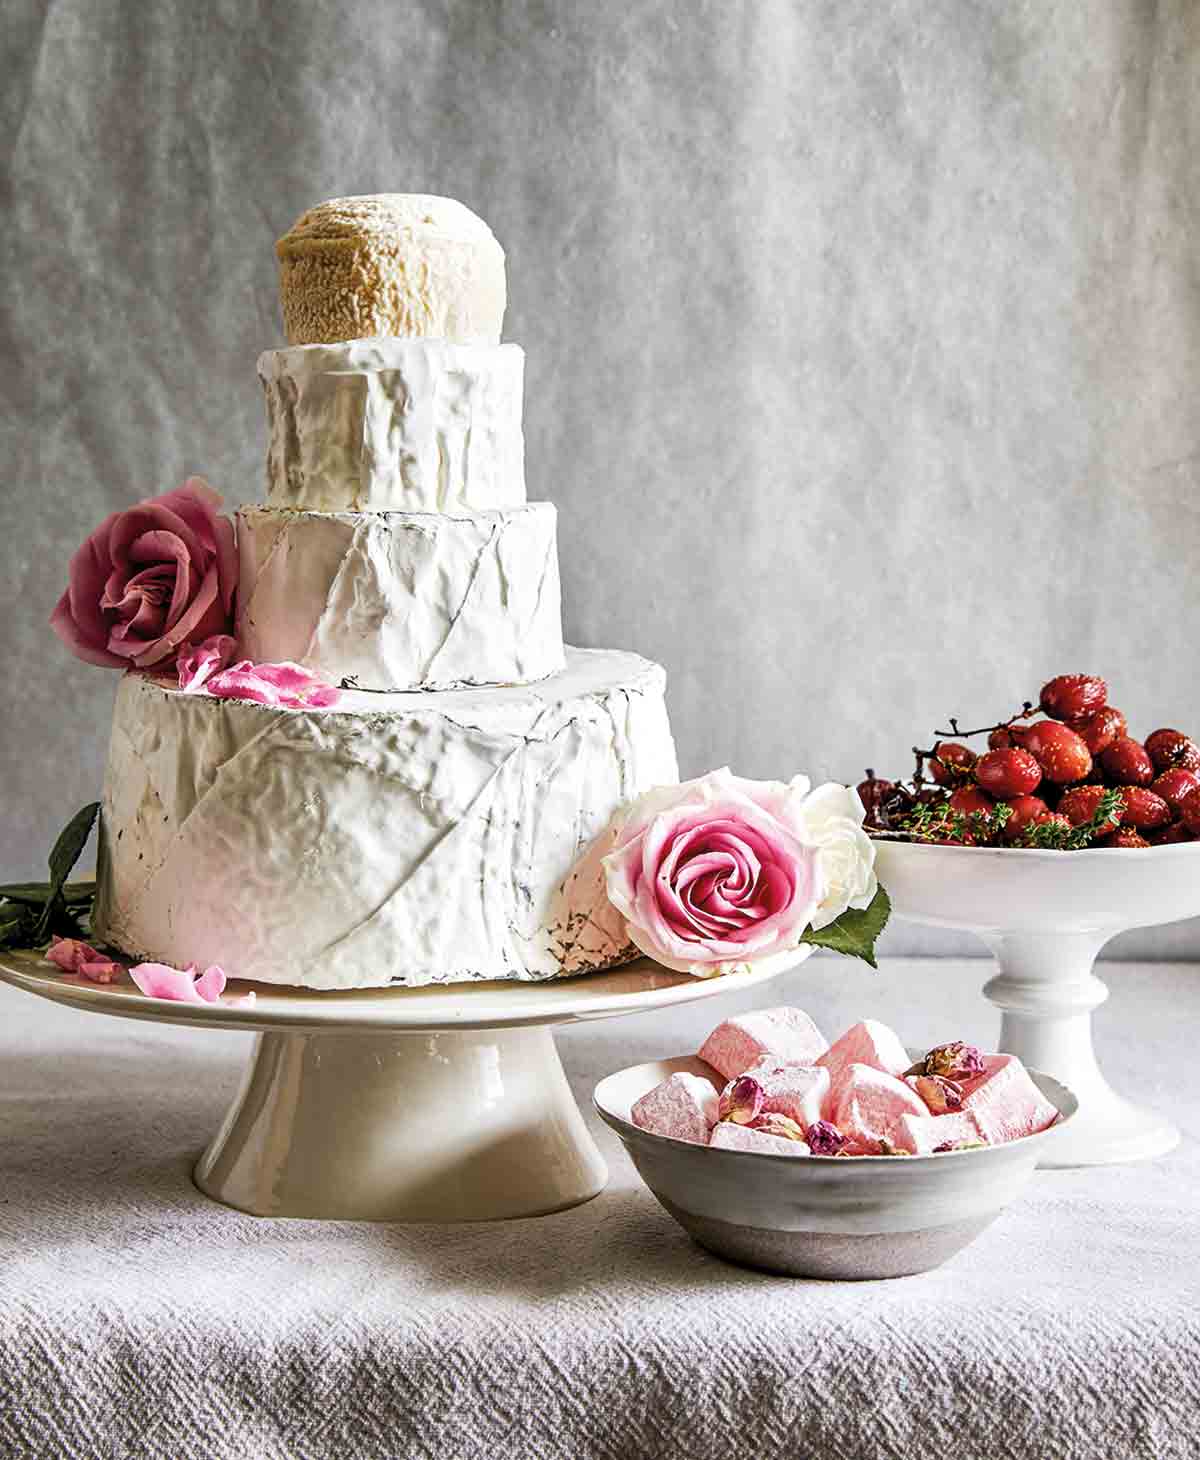 A cheese "wedding" cake made with four rounds of cheese, fresh roses, and bowls of roasted grapes and marshmallows on the side.